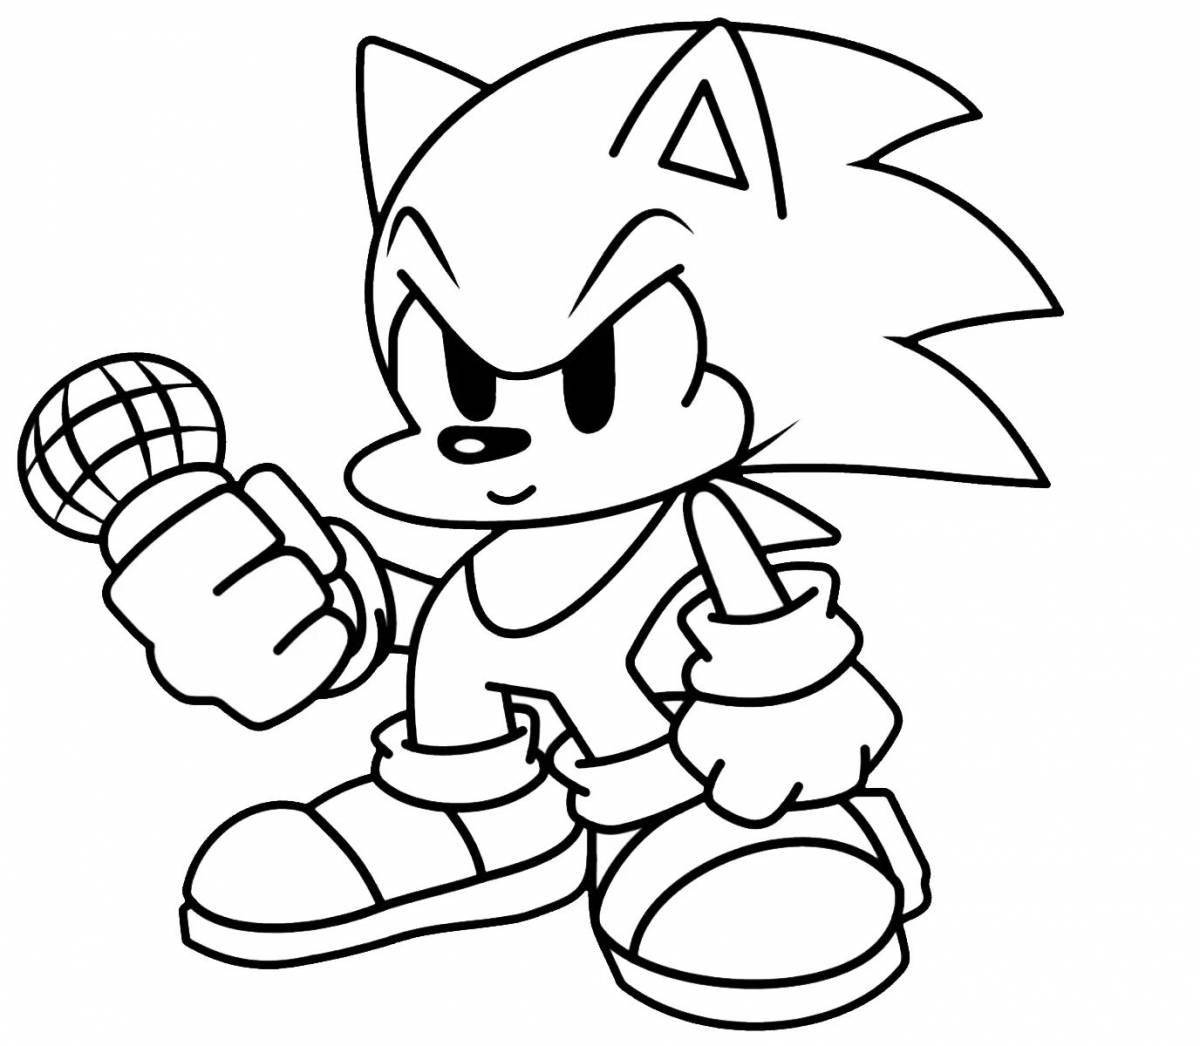 Great sonic classic coloring book